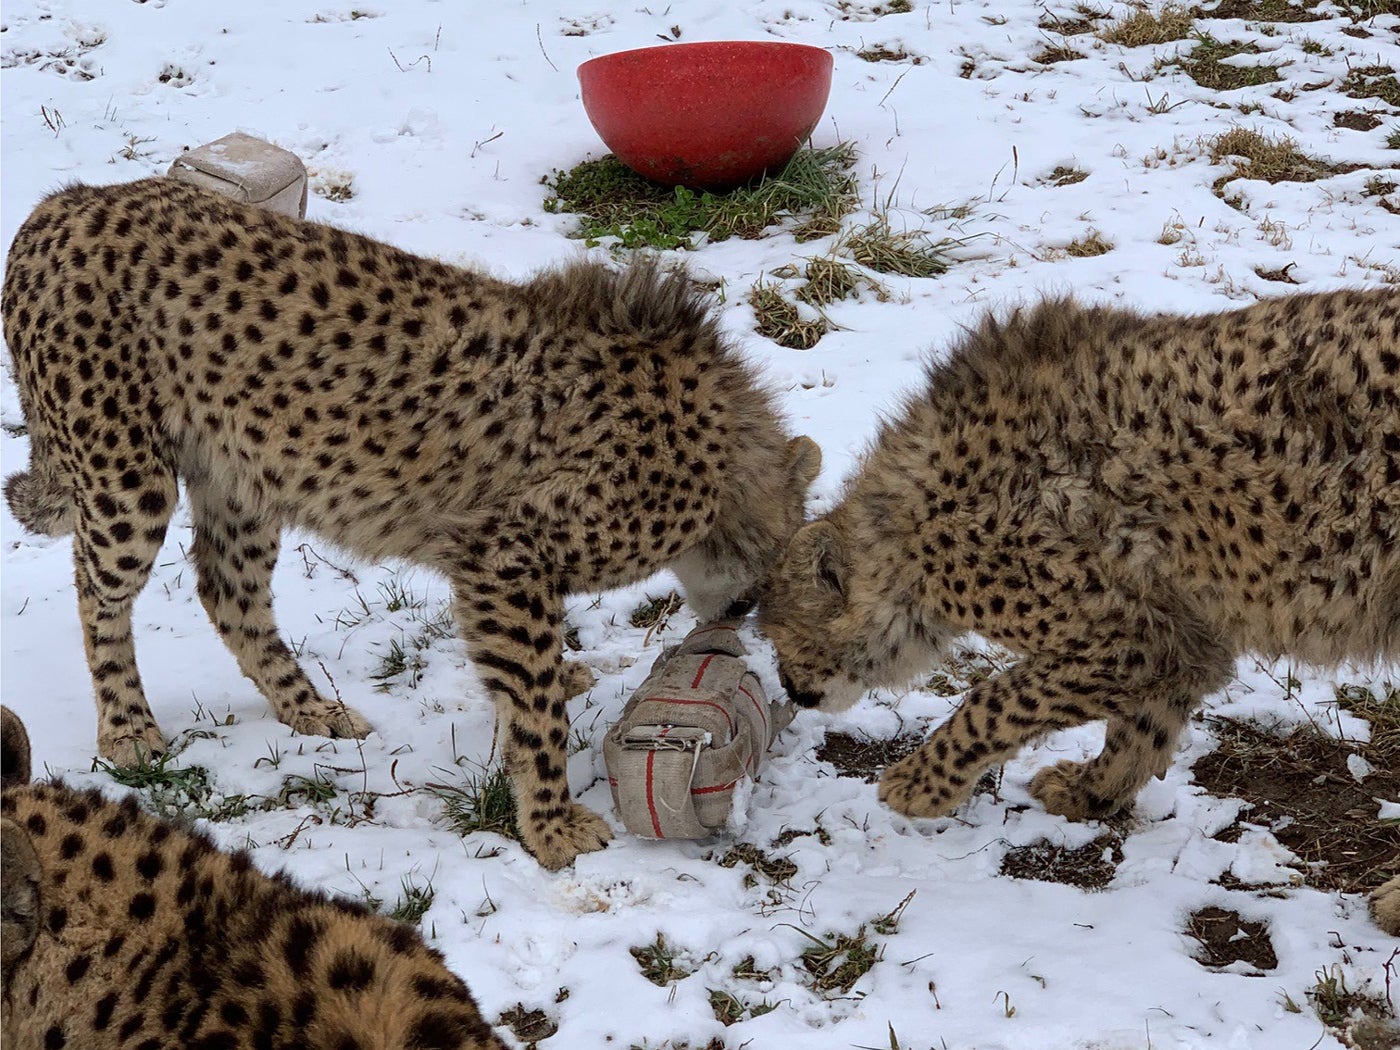 Two of Echo's cubs play with a cube-shaped toy made of fire hose.